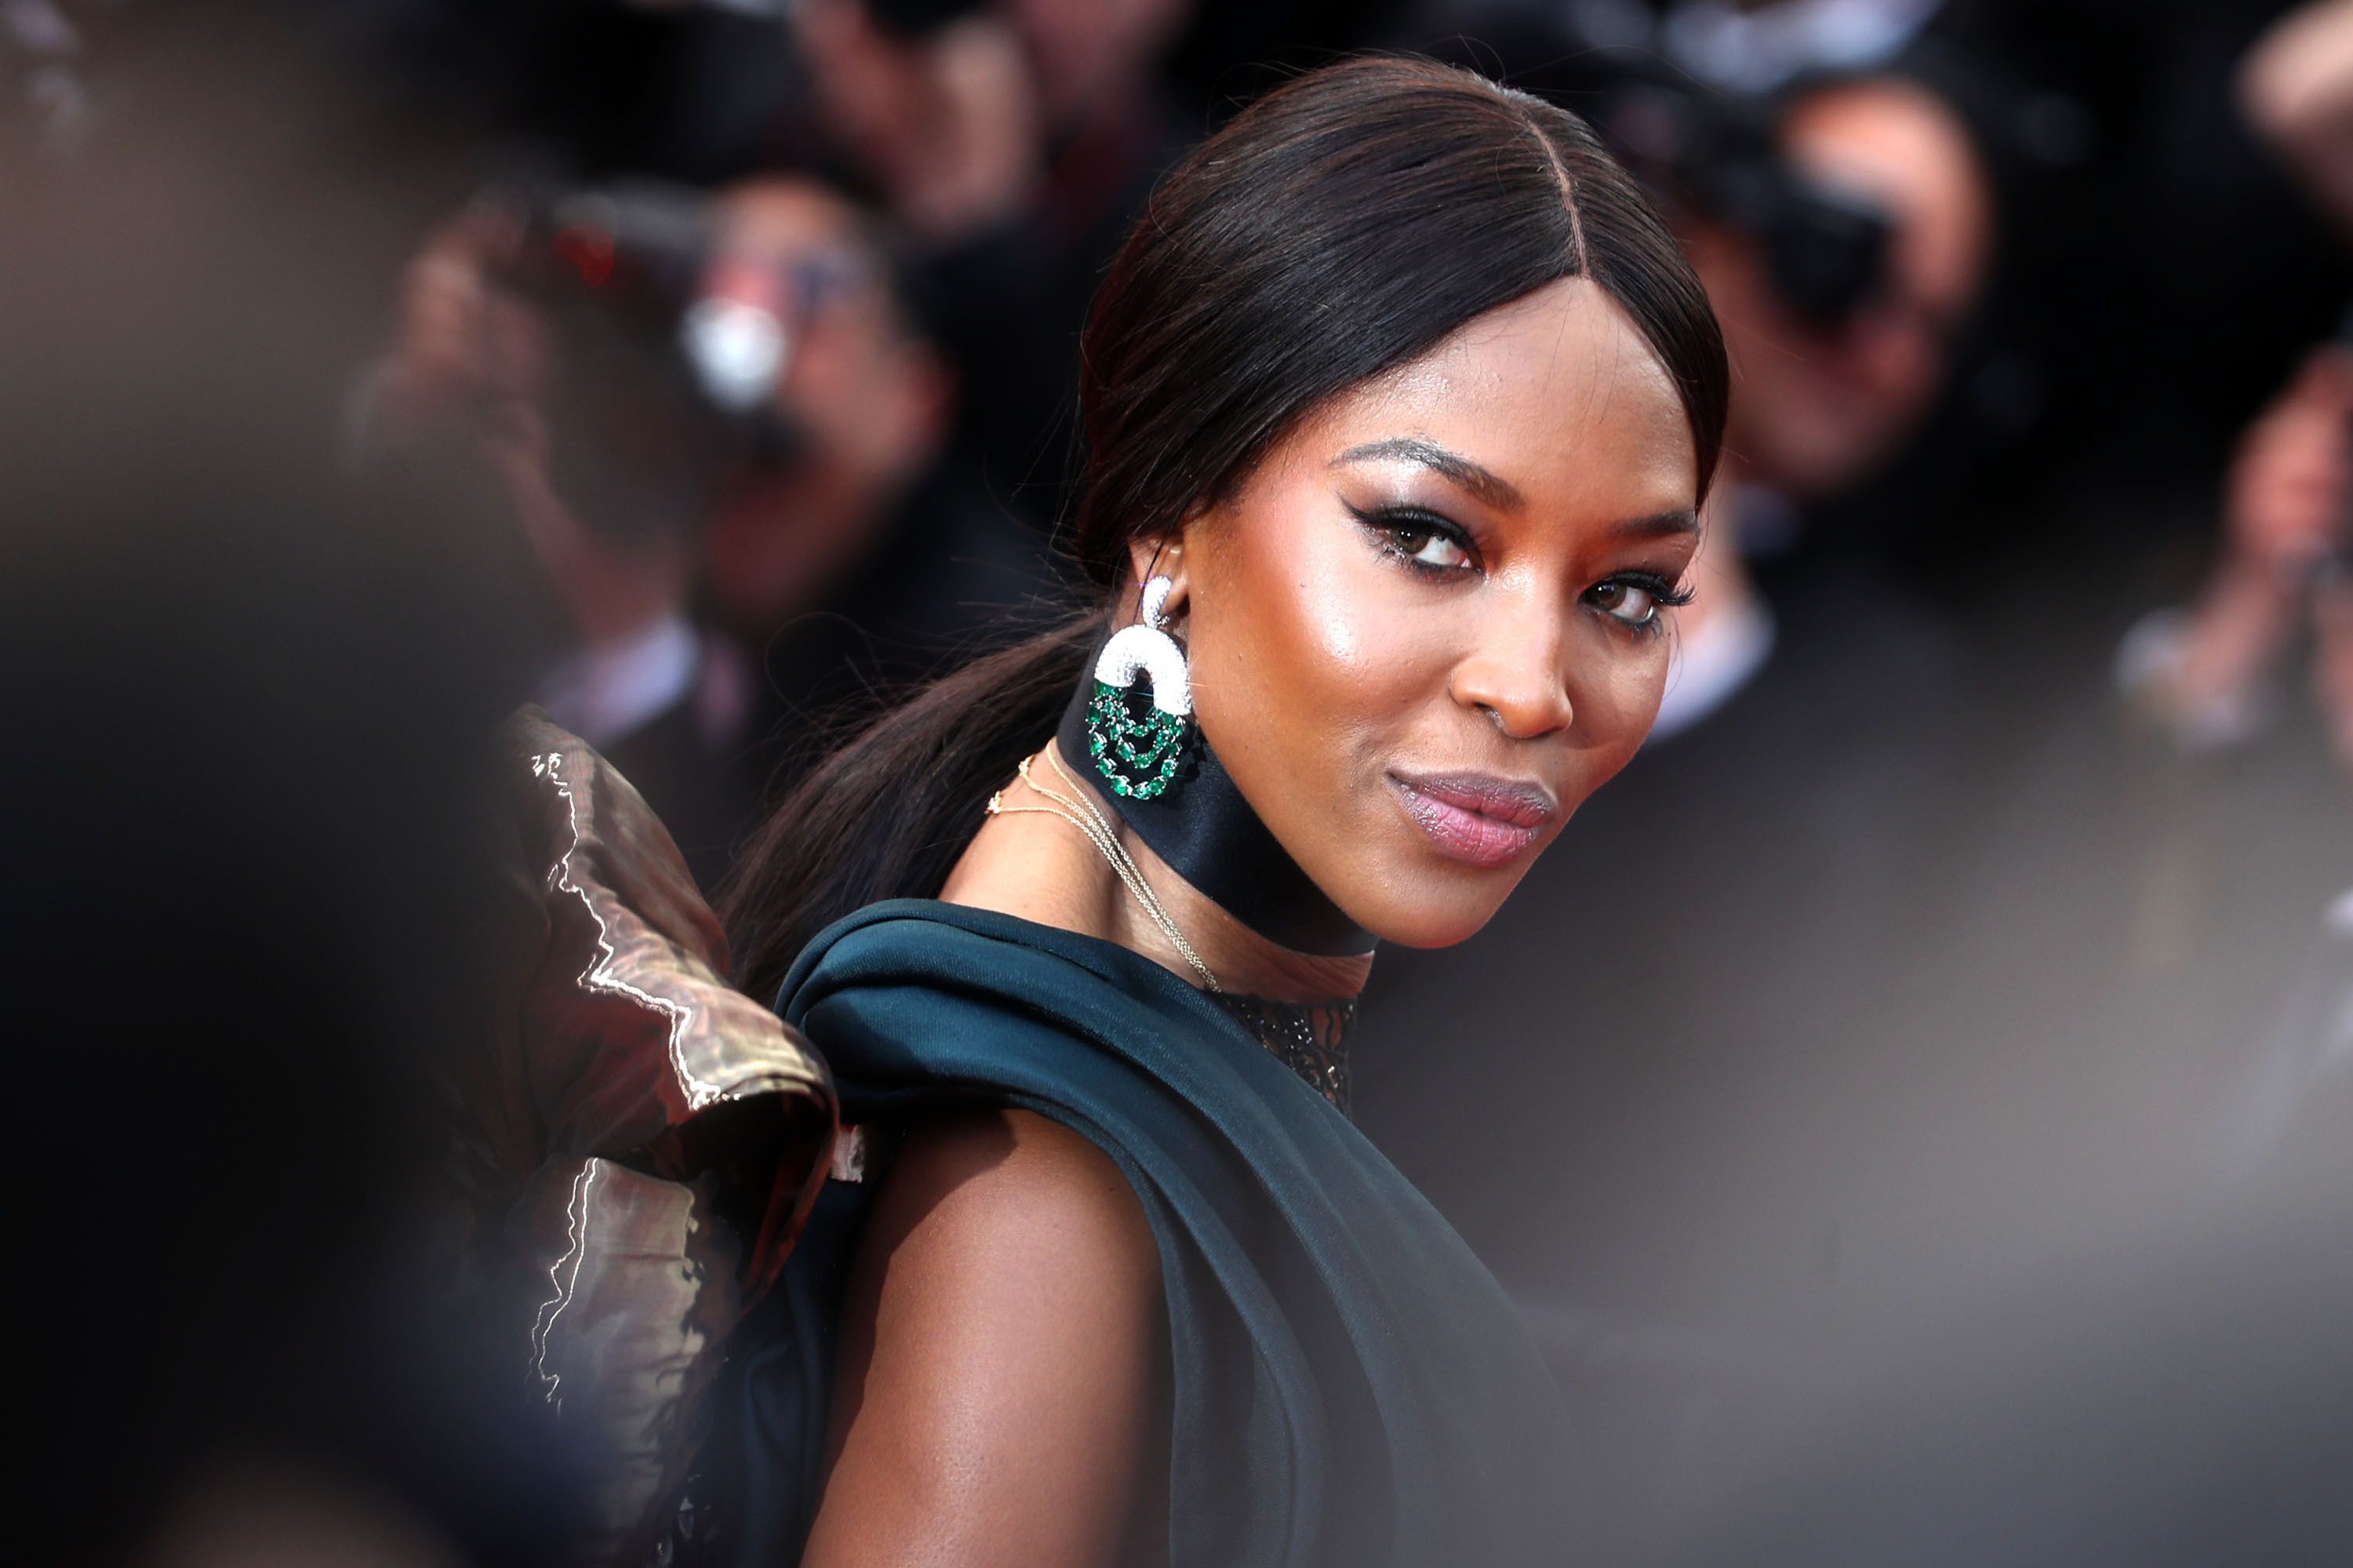 Naomi Campbell interview: 'The whole world is addressing racism